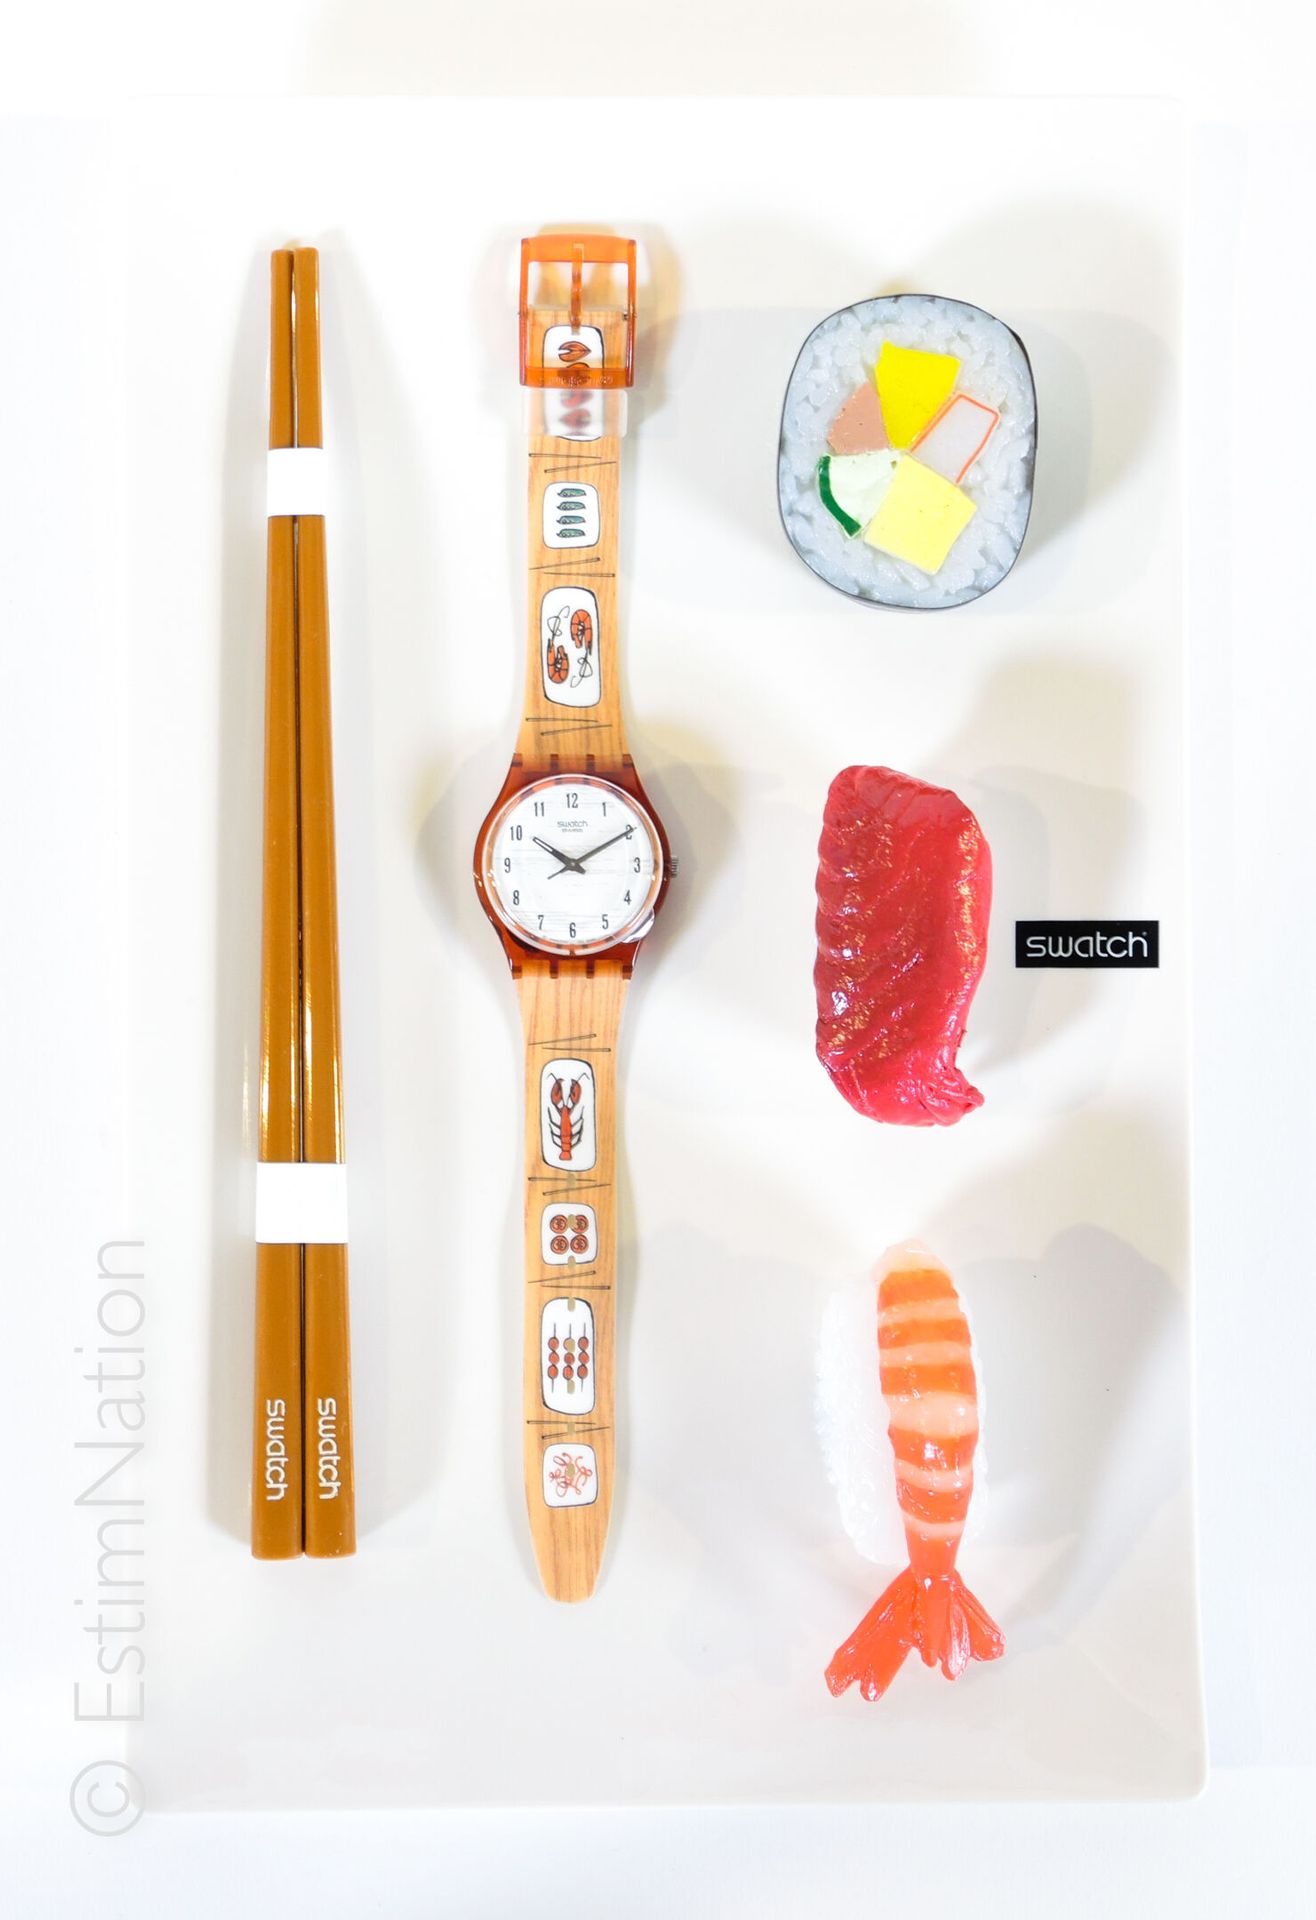 SWATCH - HORS D'OEUVRE SUSHIS - 2001 
SWATCH - HORS D'OEUVRE SUSHIS




The Orig&hellip;